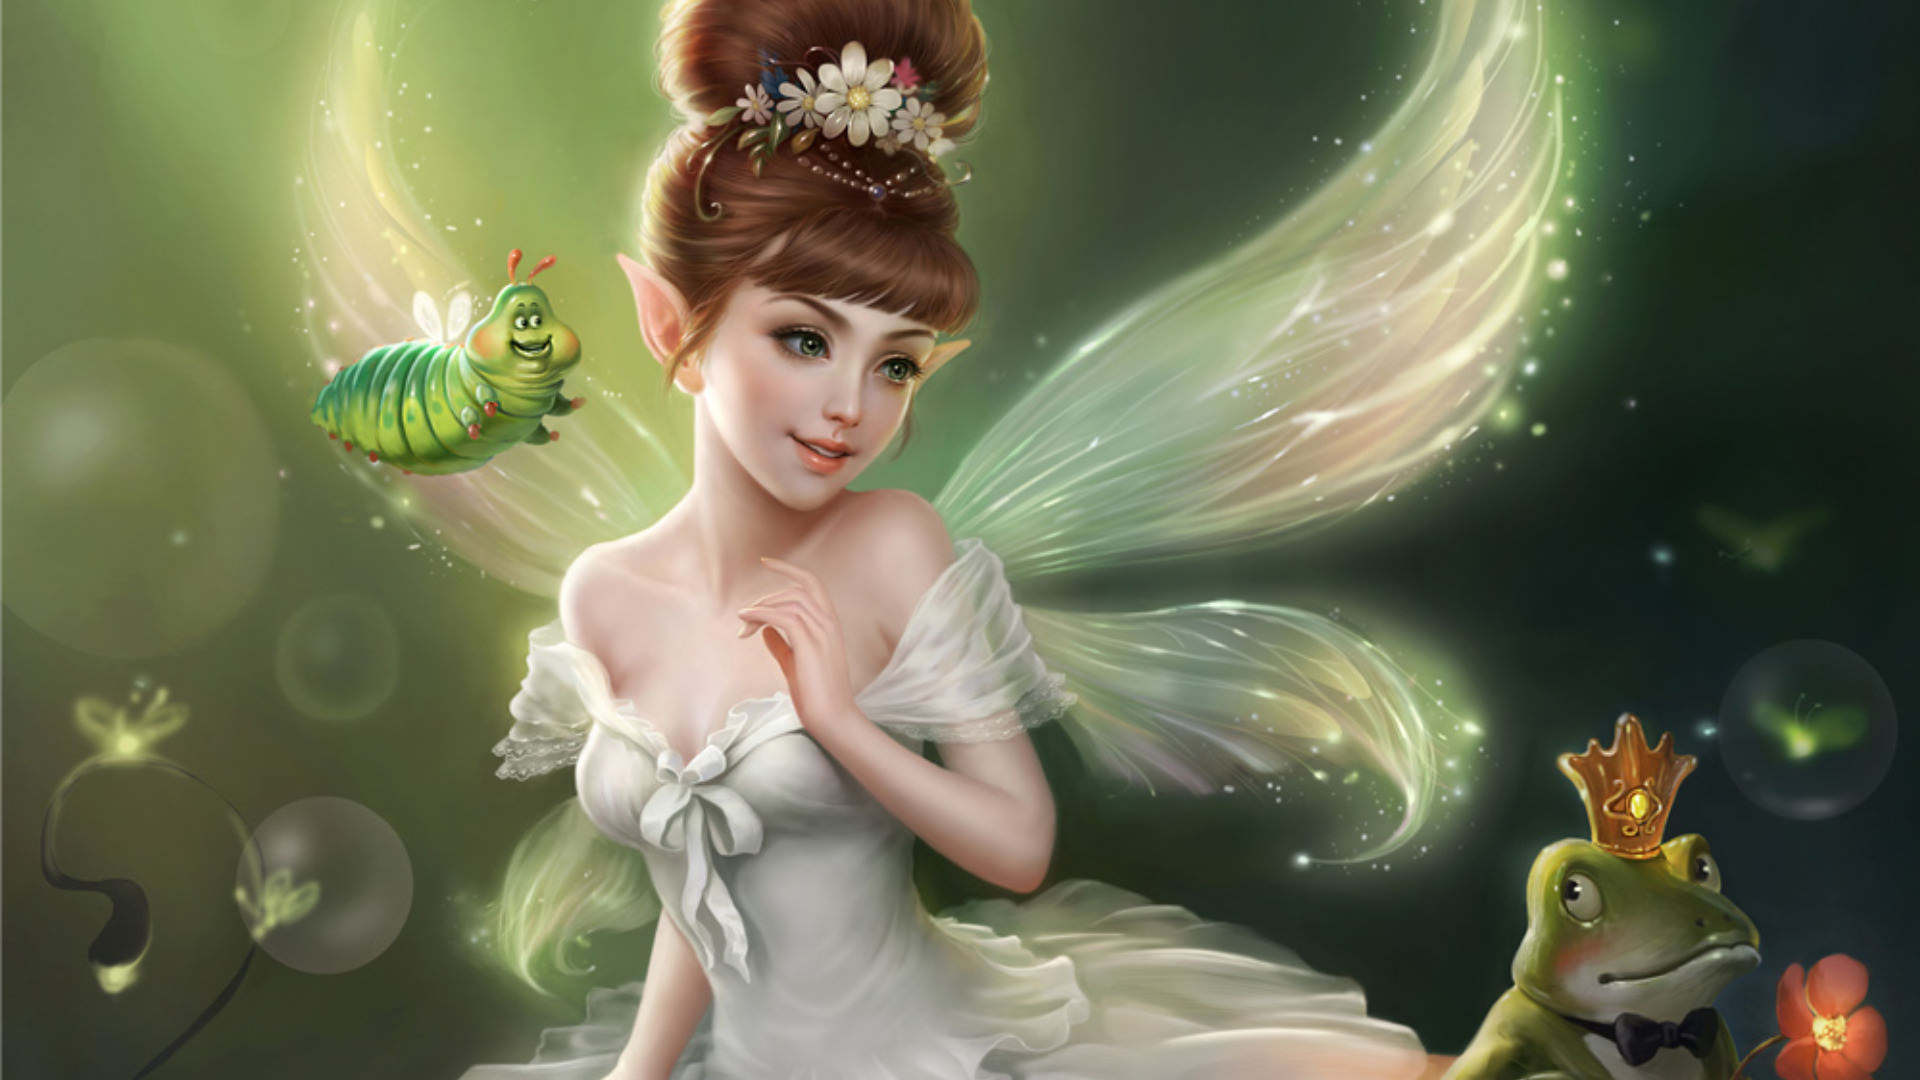 21+ Fairy Wallpapers, Fantasy Fairy Backgrounds, Images, Pictures ...